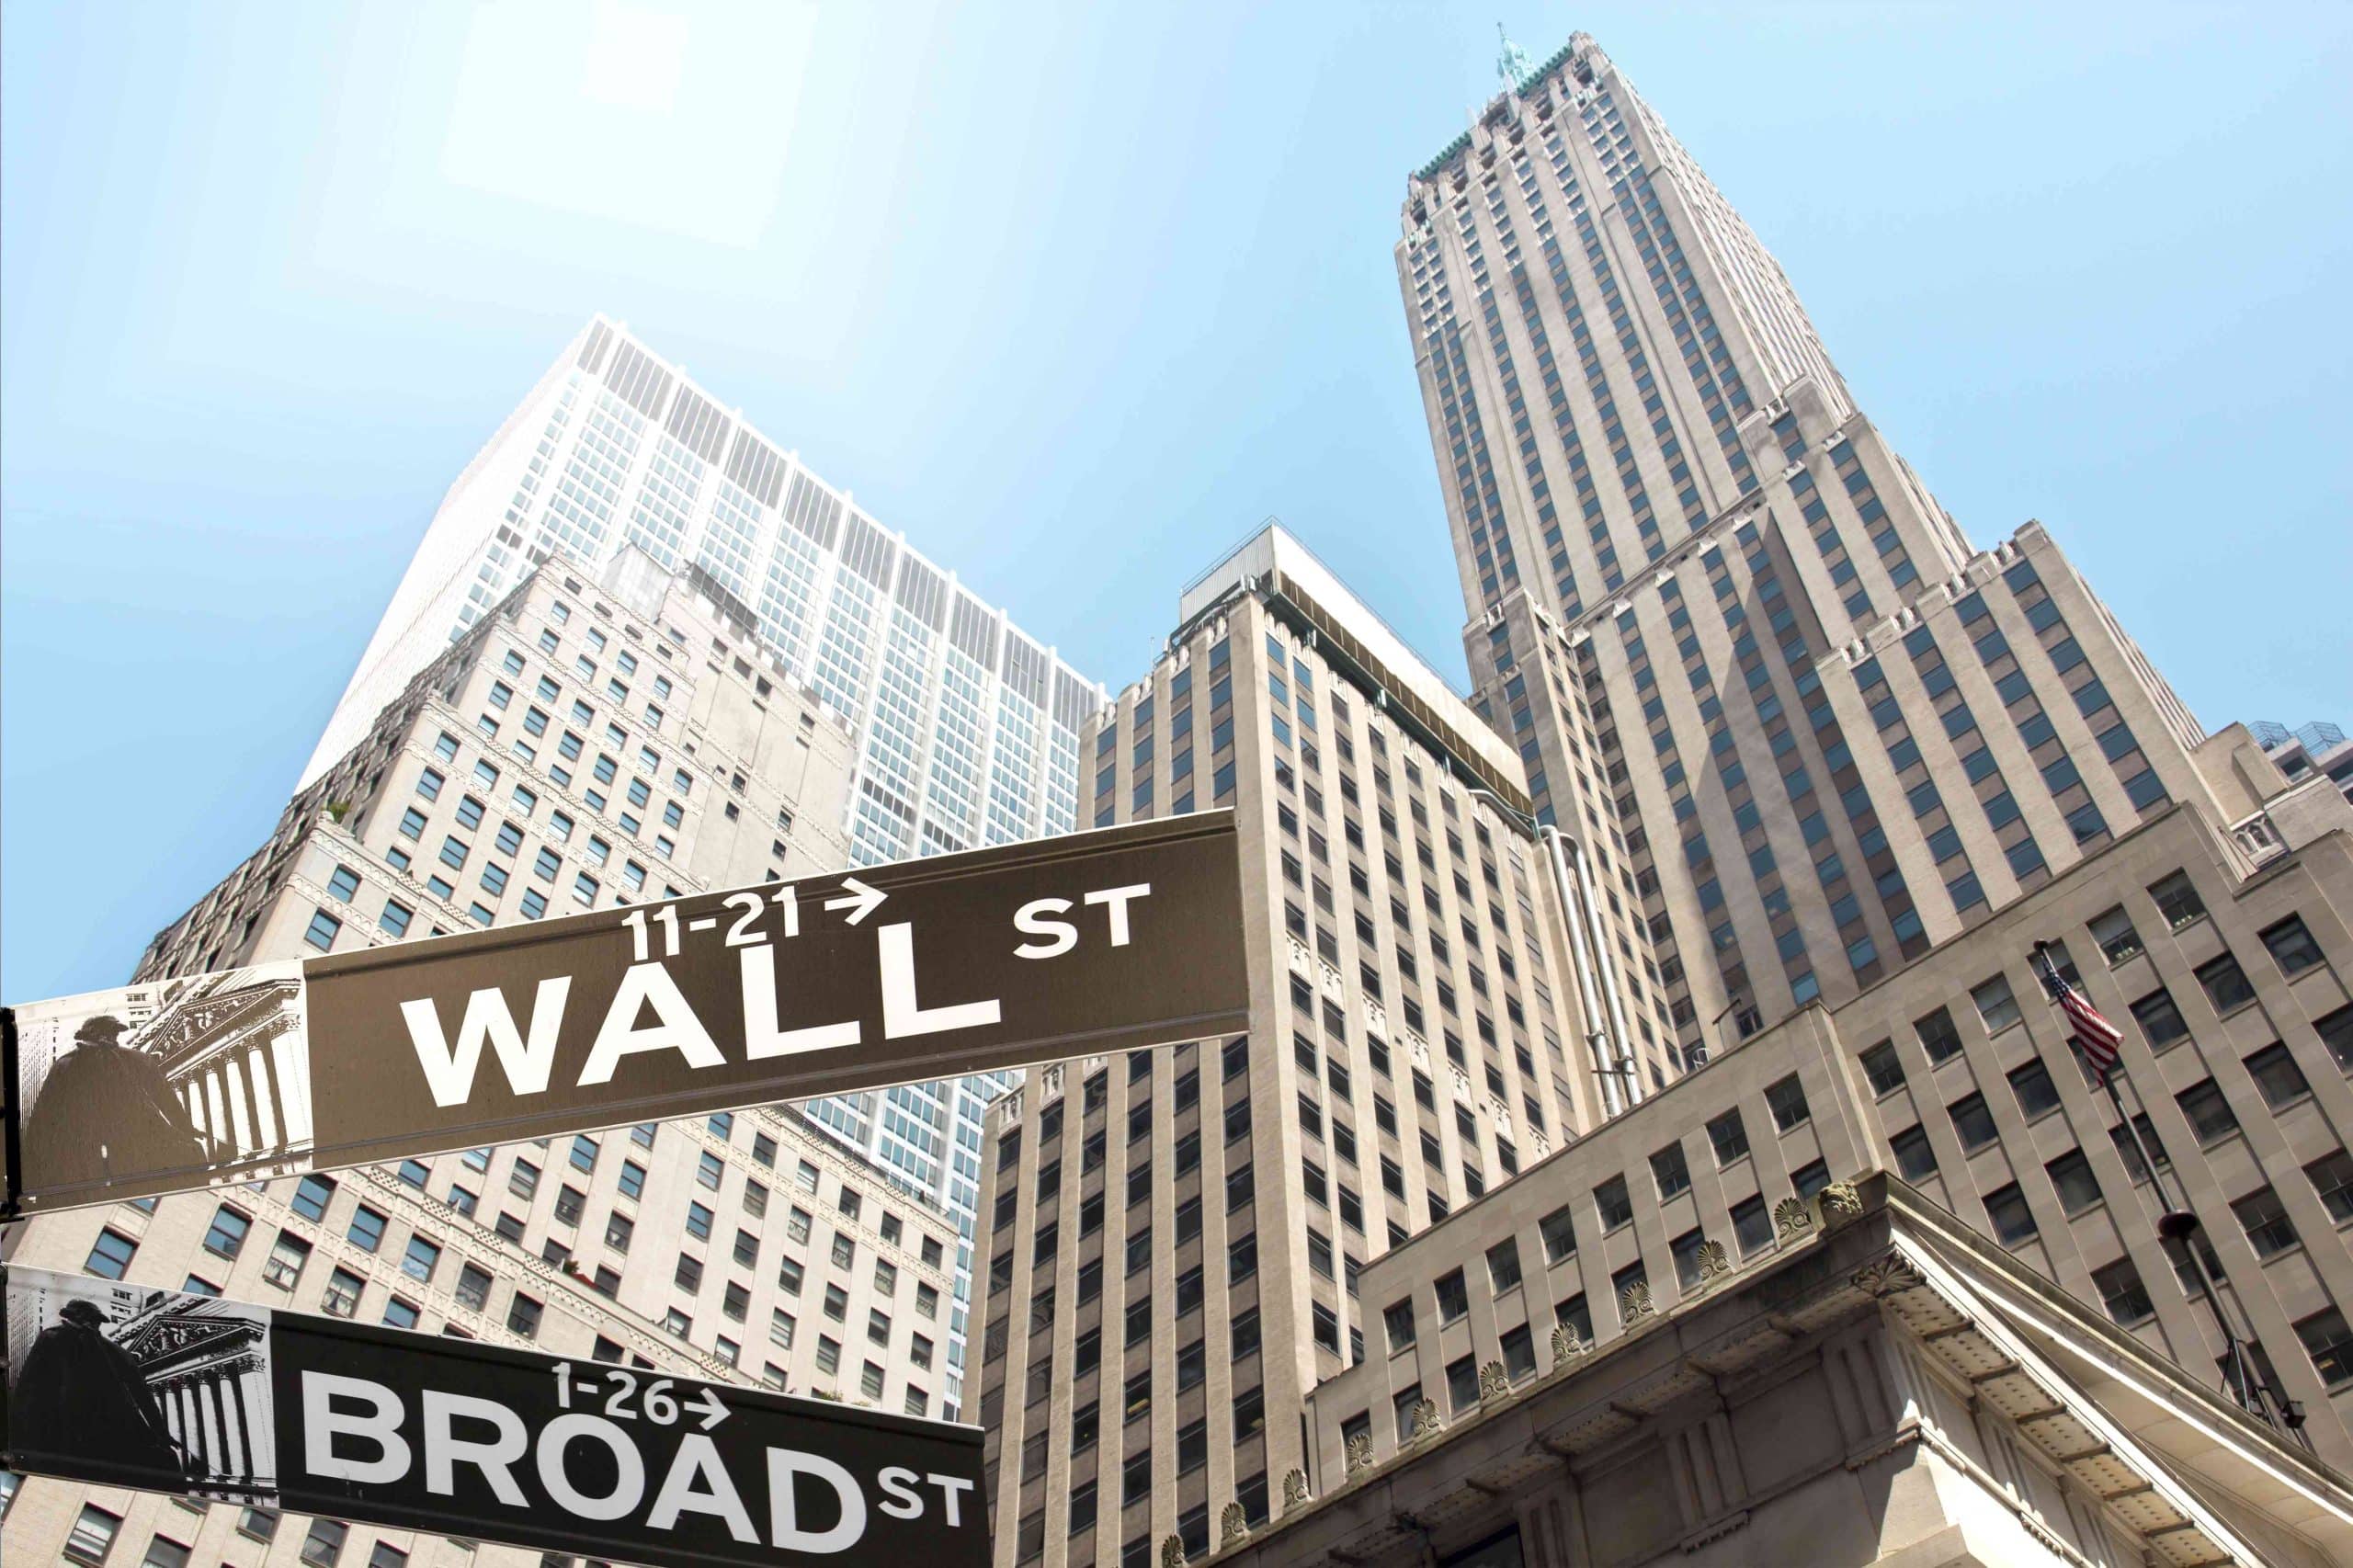 Wall Street New York Self-Guided Walking Tour